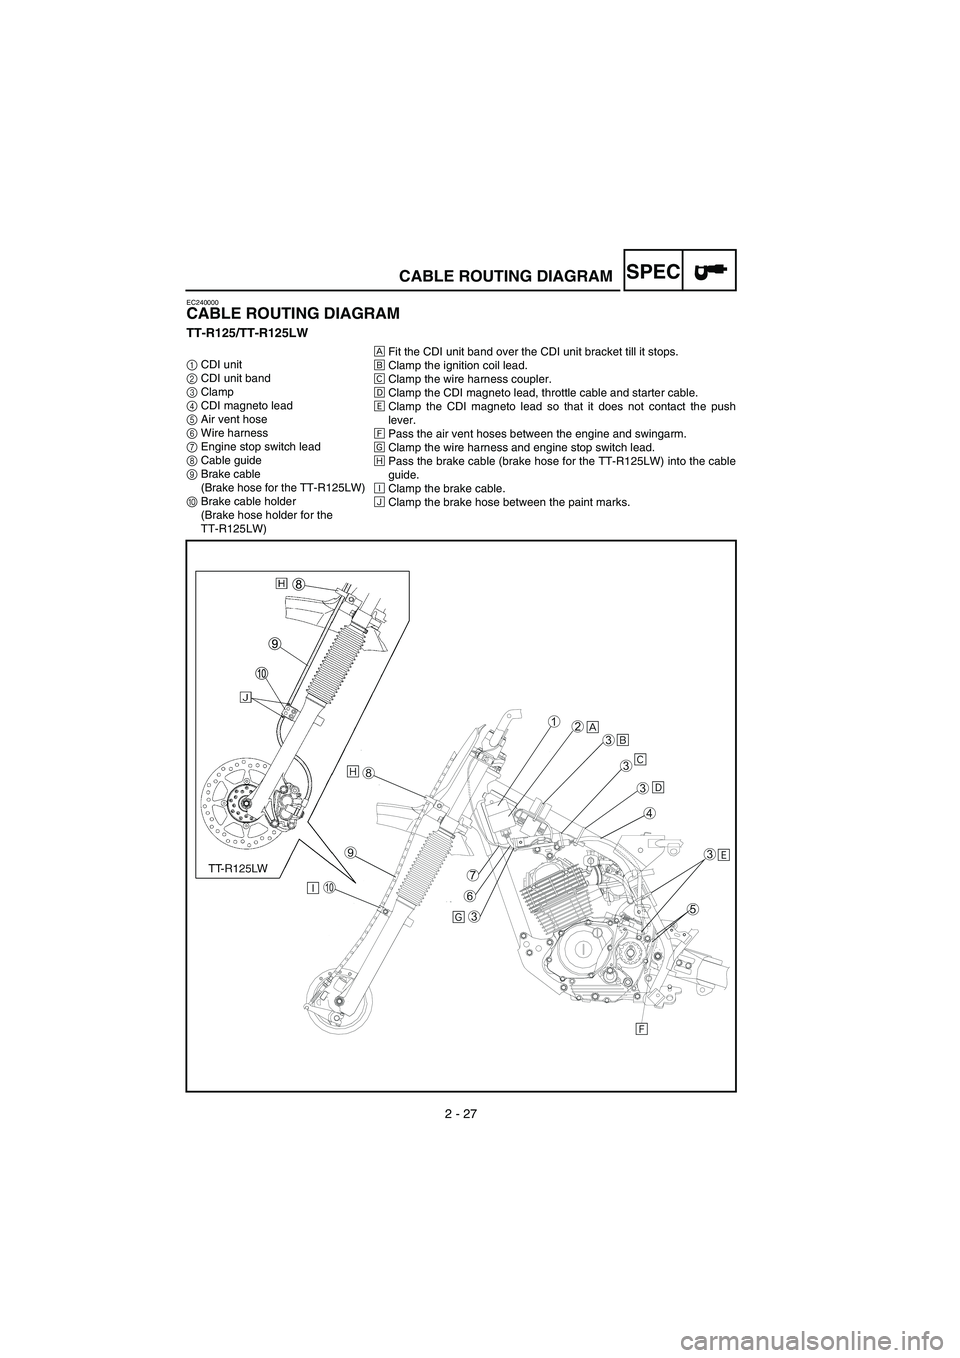 YAMAHA TTR125 2006  Notices Demploi (in French) 152 - A - V
2 - 27
SPEC
EC240000
CABLE ROUTING DIAGRAM
TT-R125/TT-R125LW
1 CDI unit
2  CDI unit band
3  Clamp
4  CDI magneto lead
5  Air vent hose
6  Wire harness
7  Engine stop switch lead
8  Cable g